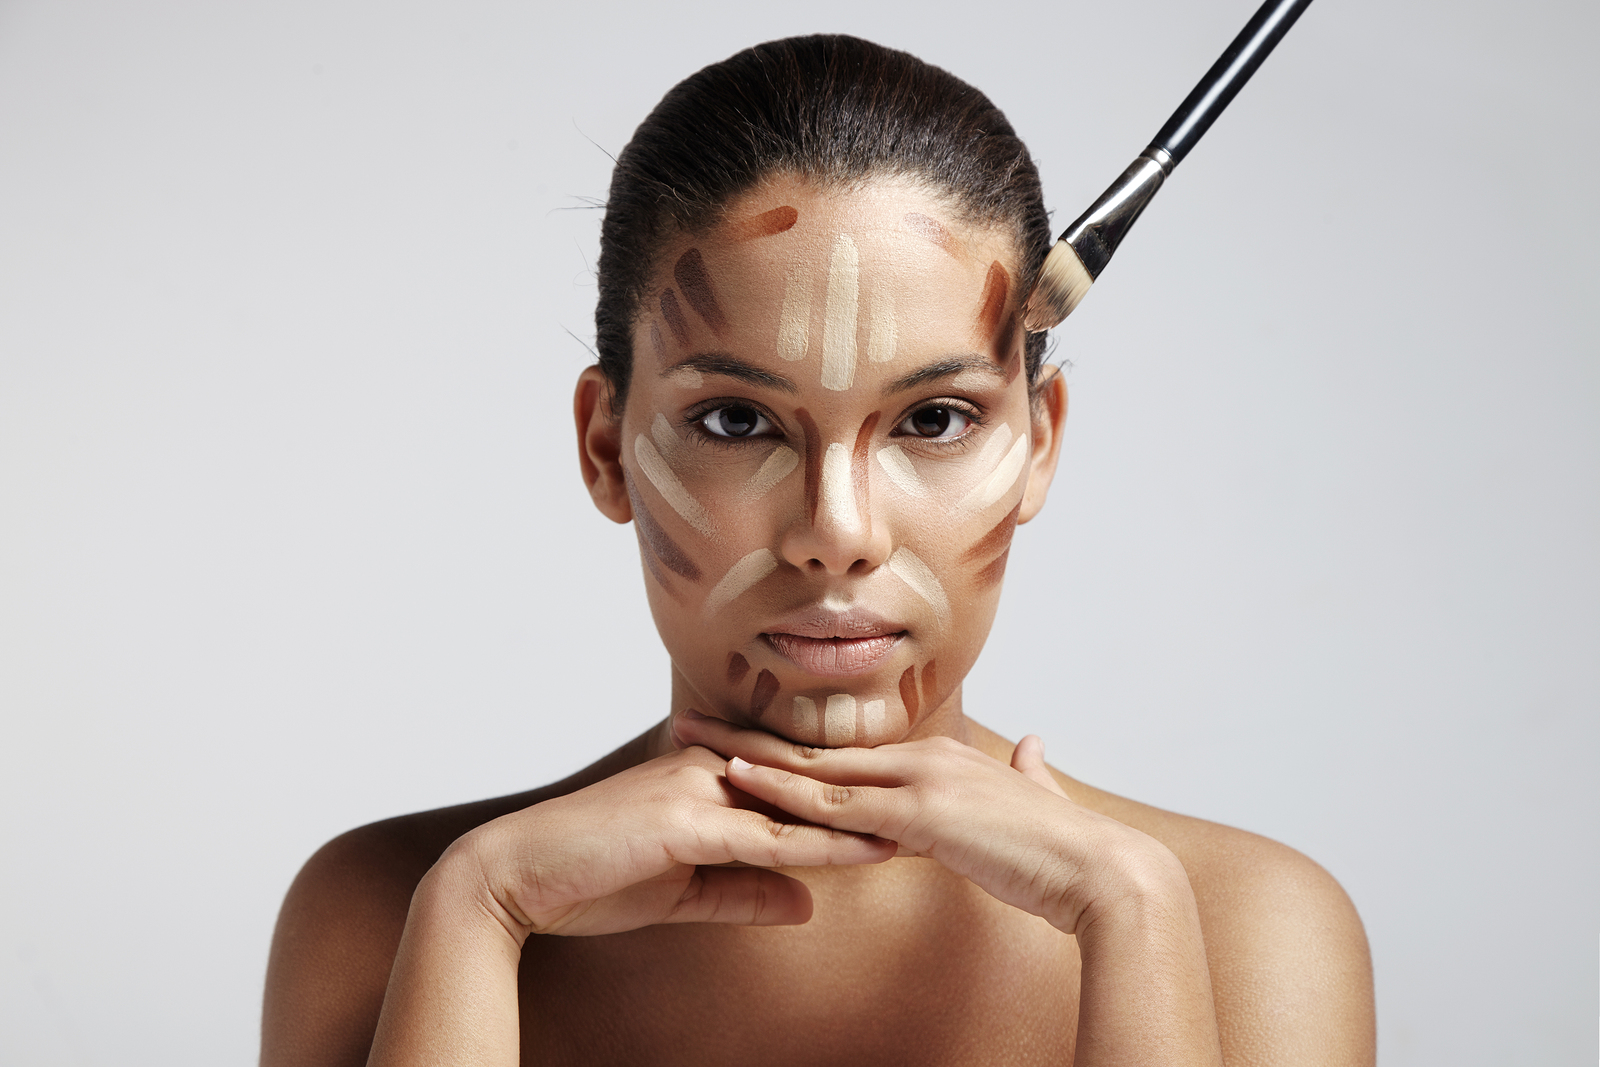 Common Contouring Mistakes To Avoid